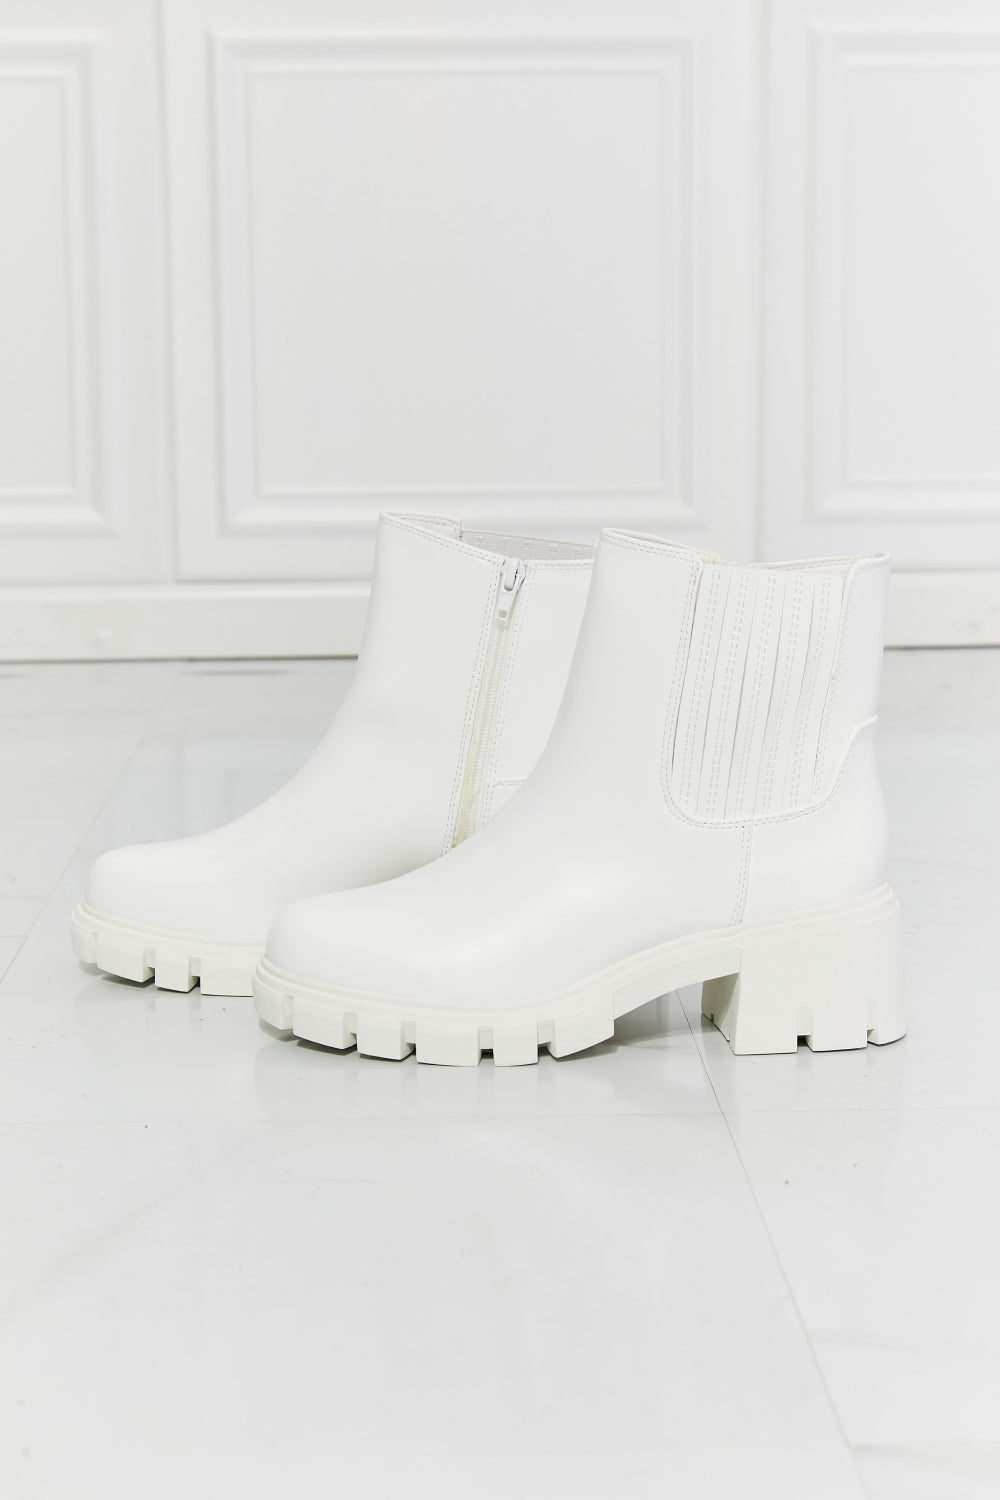 MMShoes What It Takes Lug Sole Chelsea Boots in White - Tigbul's Fashion